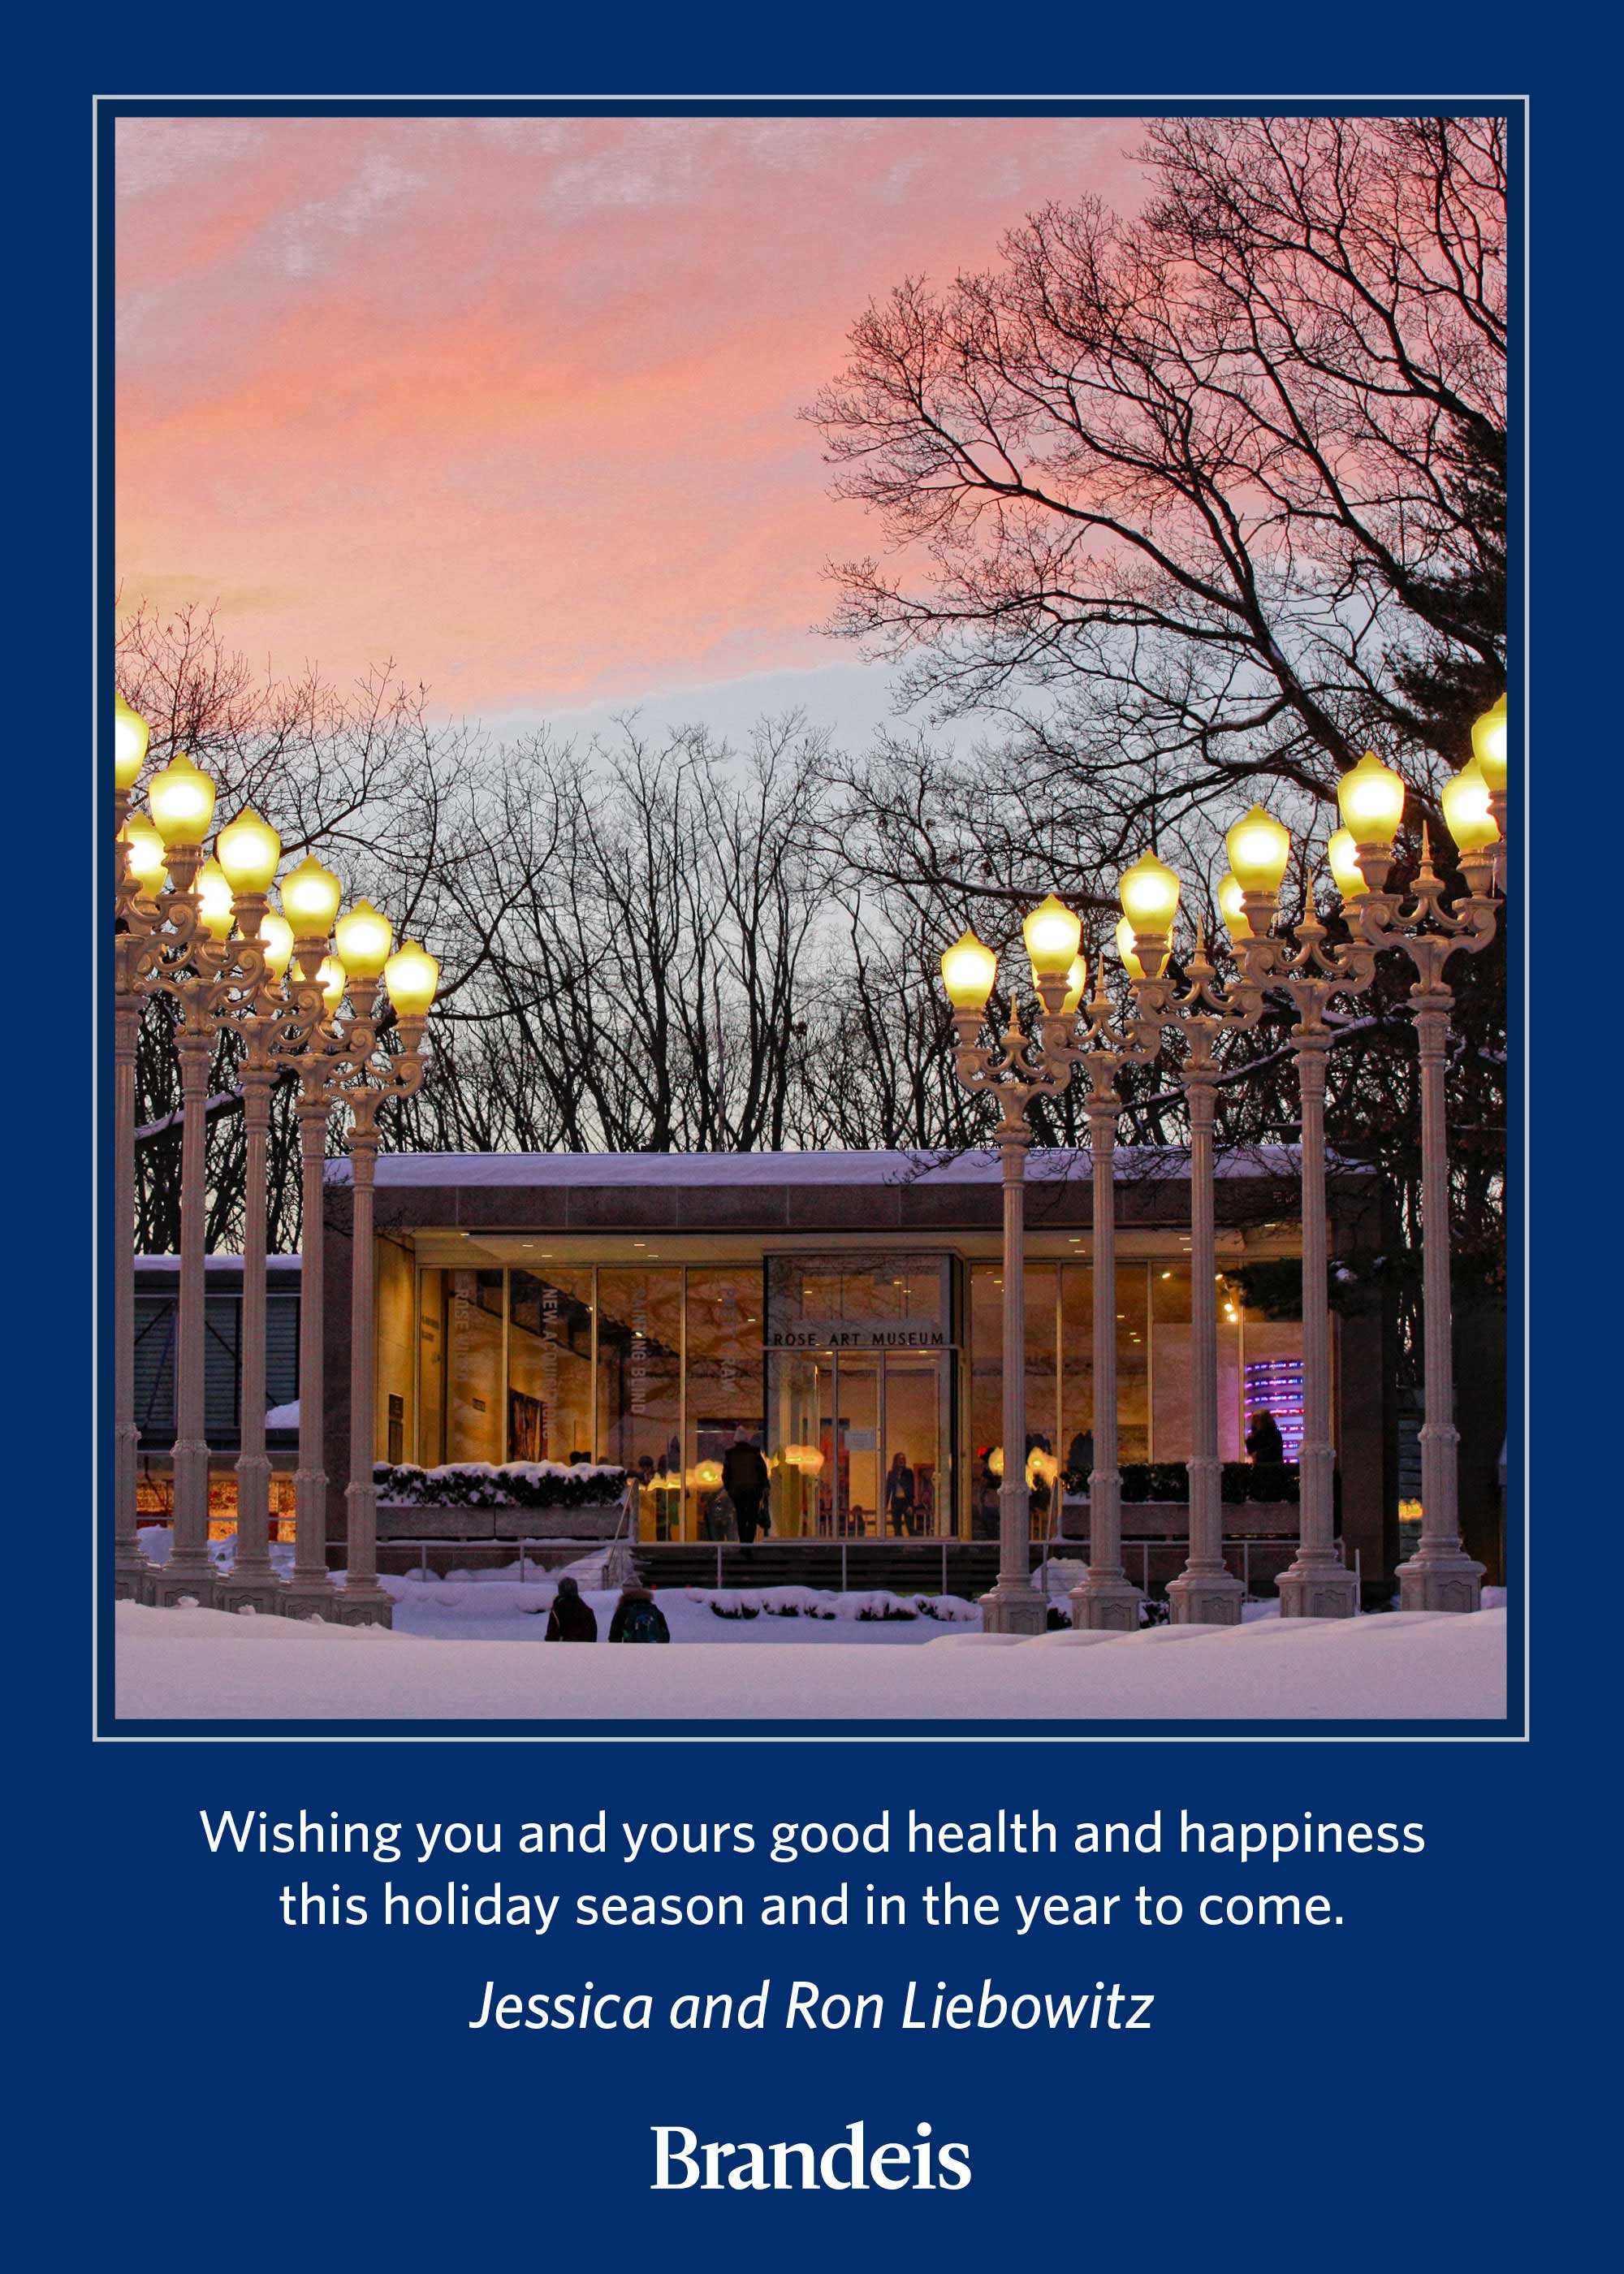 Wishing you peace and happiness this holiday season and in the new year to come. Jessica and Ron Liebowitz. Brandeis